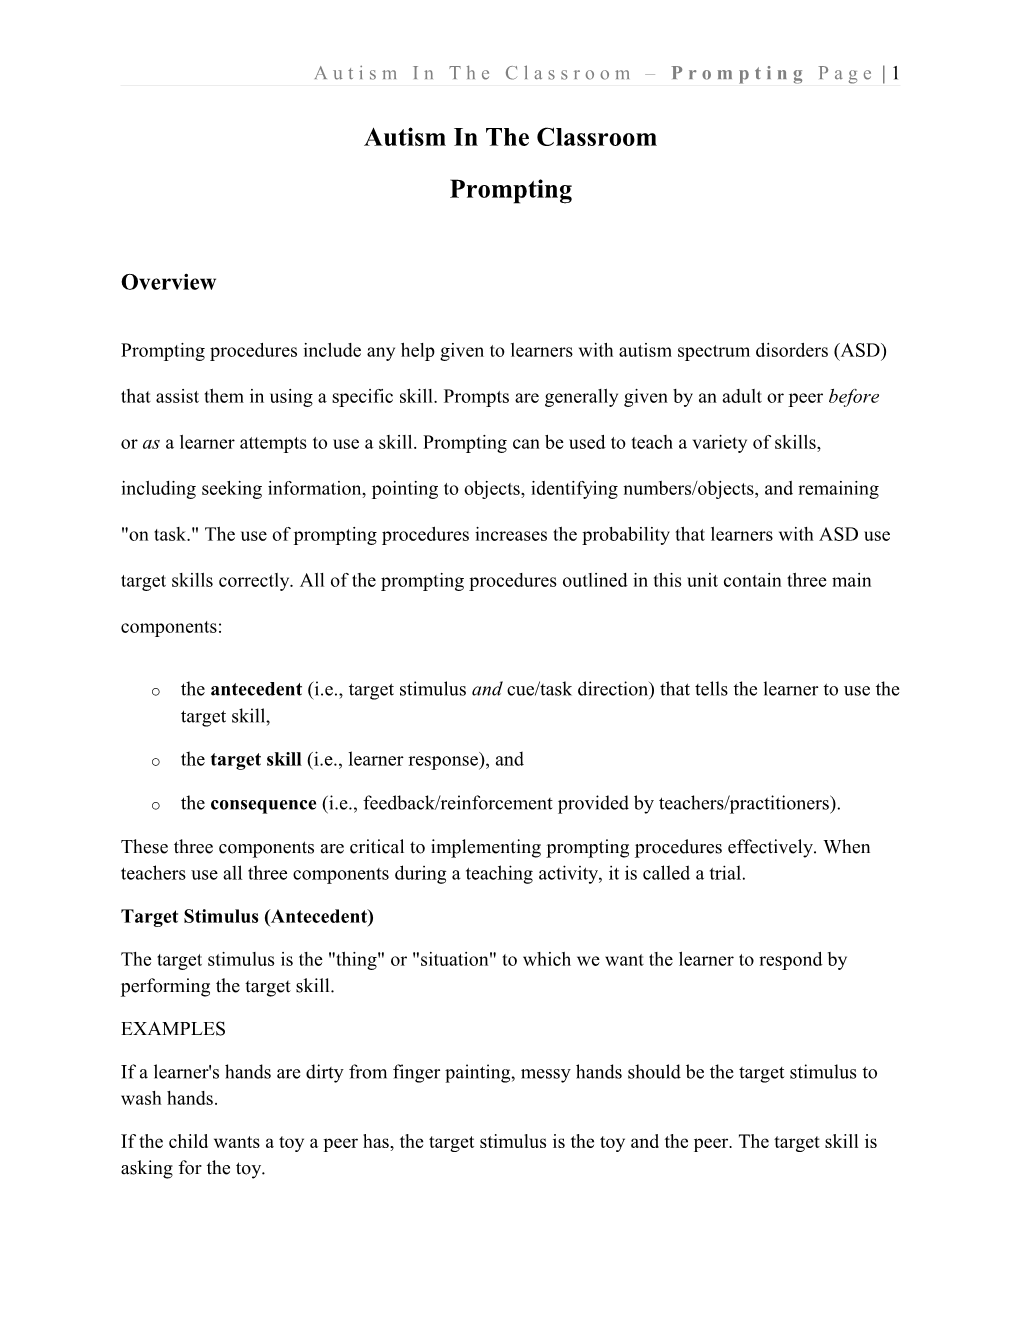 Autism in the Classroom Prompting Page 1